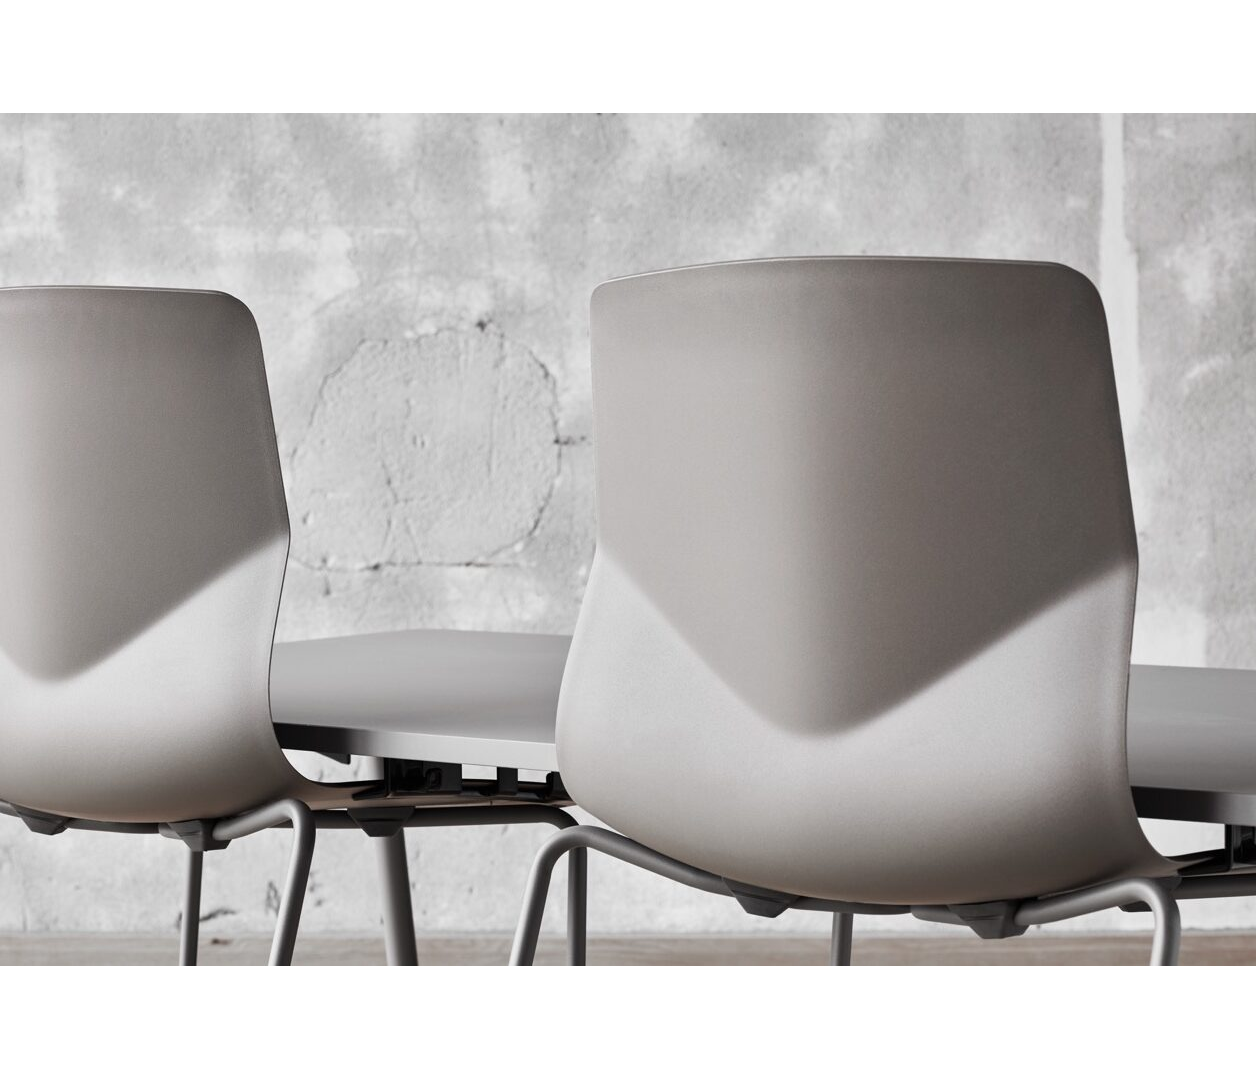 OCEE&FOUR – Chairs – FourSure 44 – Details Image 5 Large